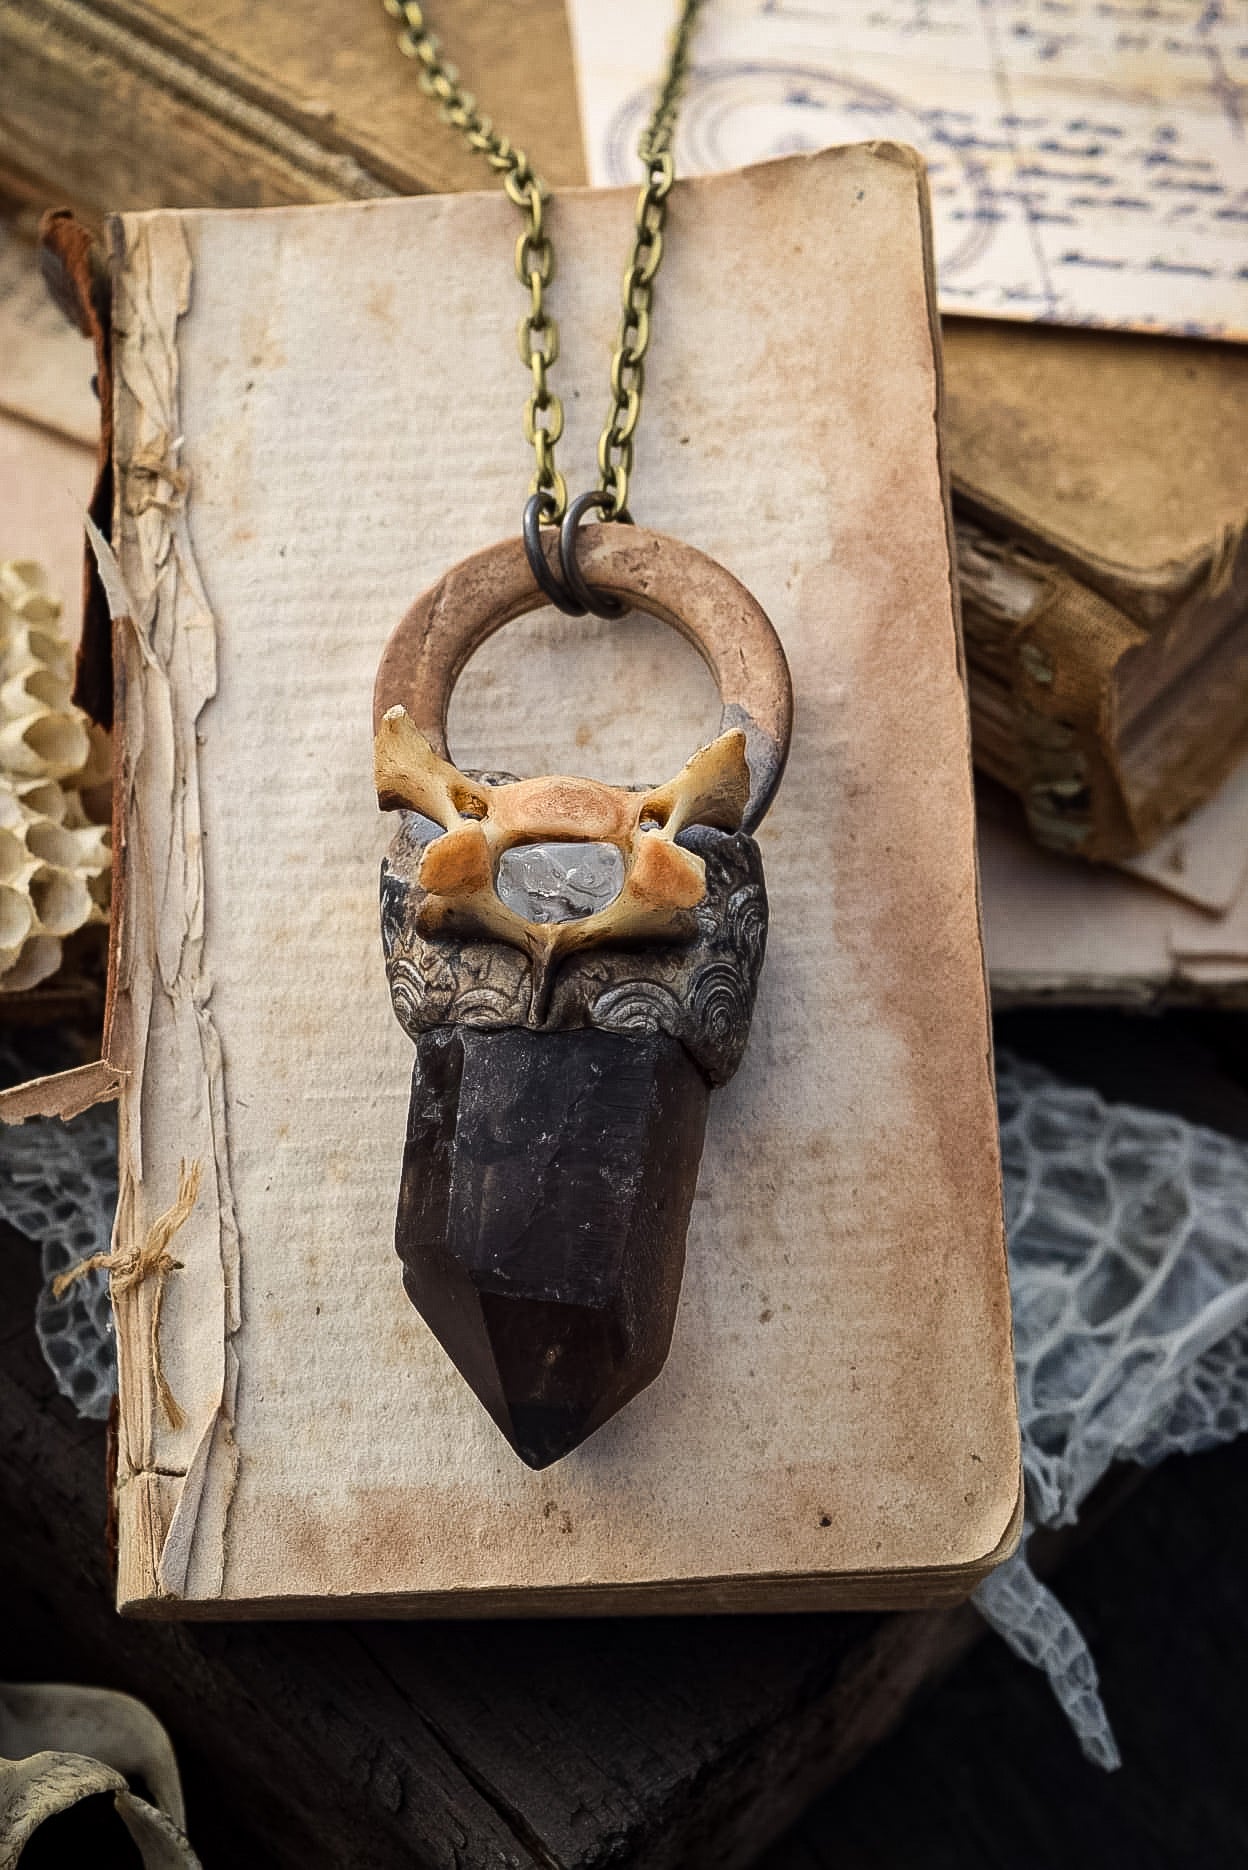 Crystal and Bone Necklace for Connecting with Nature, Wild Creativity and Growth